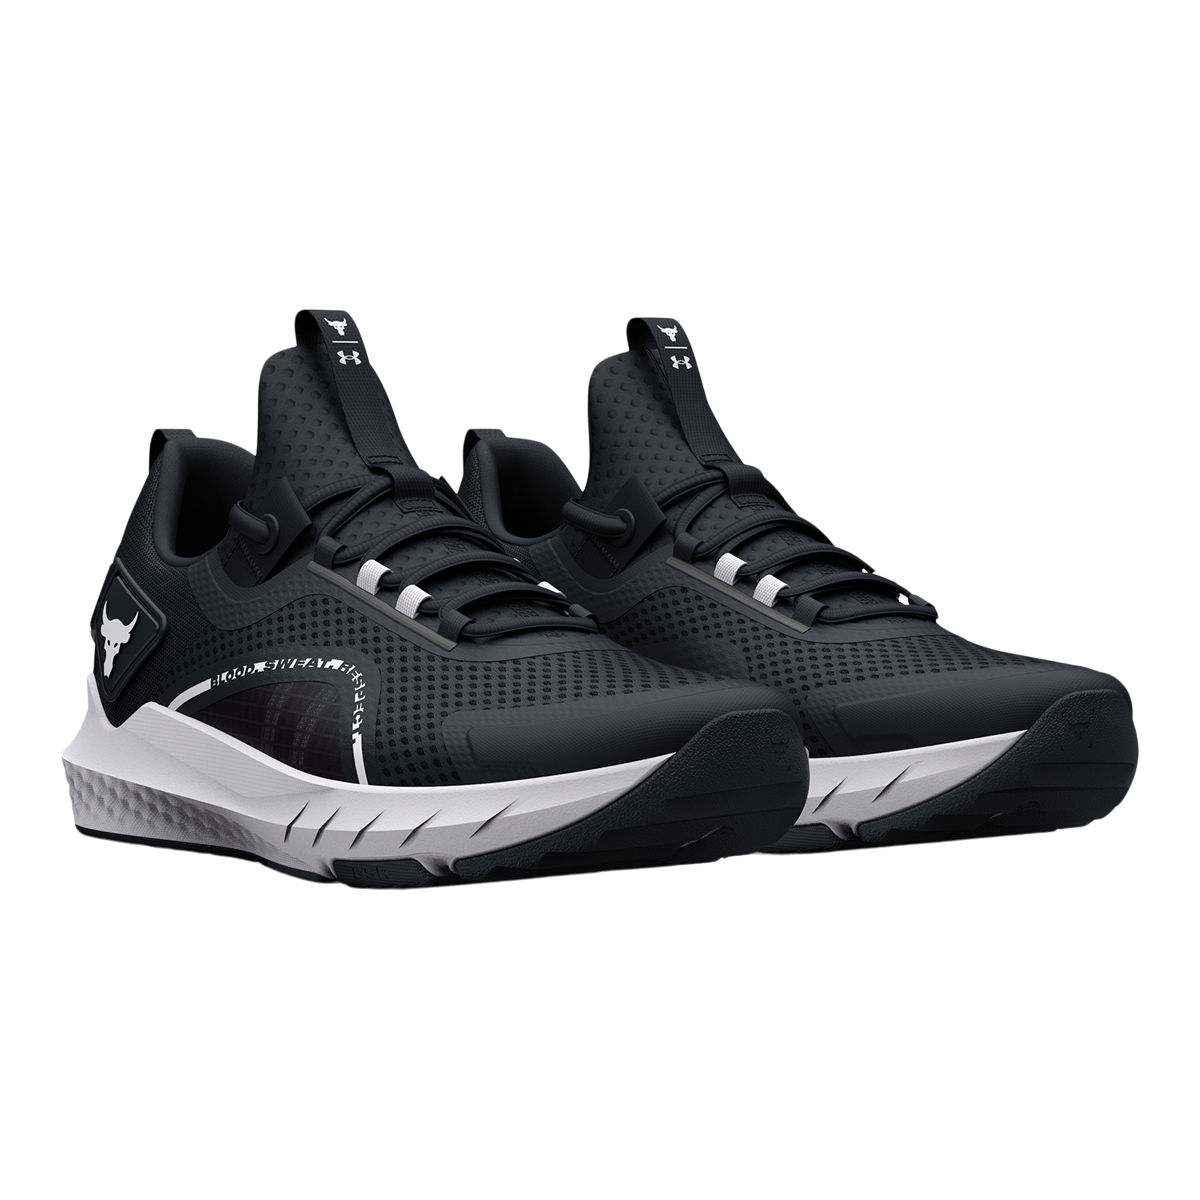 Under Armour Mens Project Rock 3 Black HOVR Training Shoes